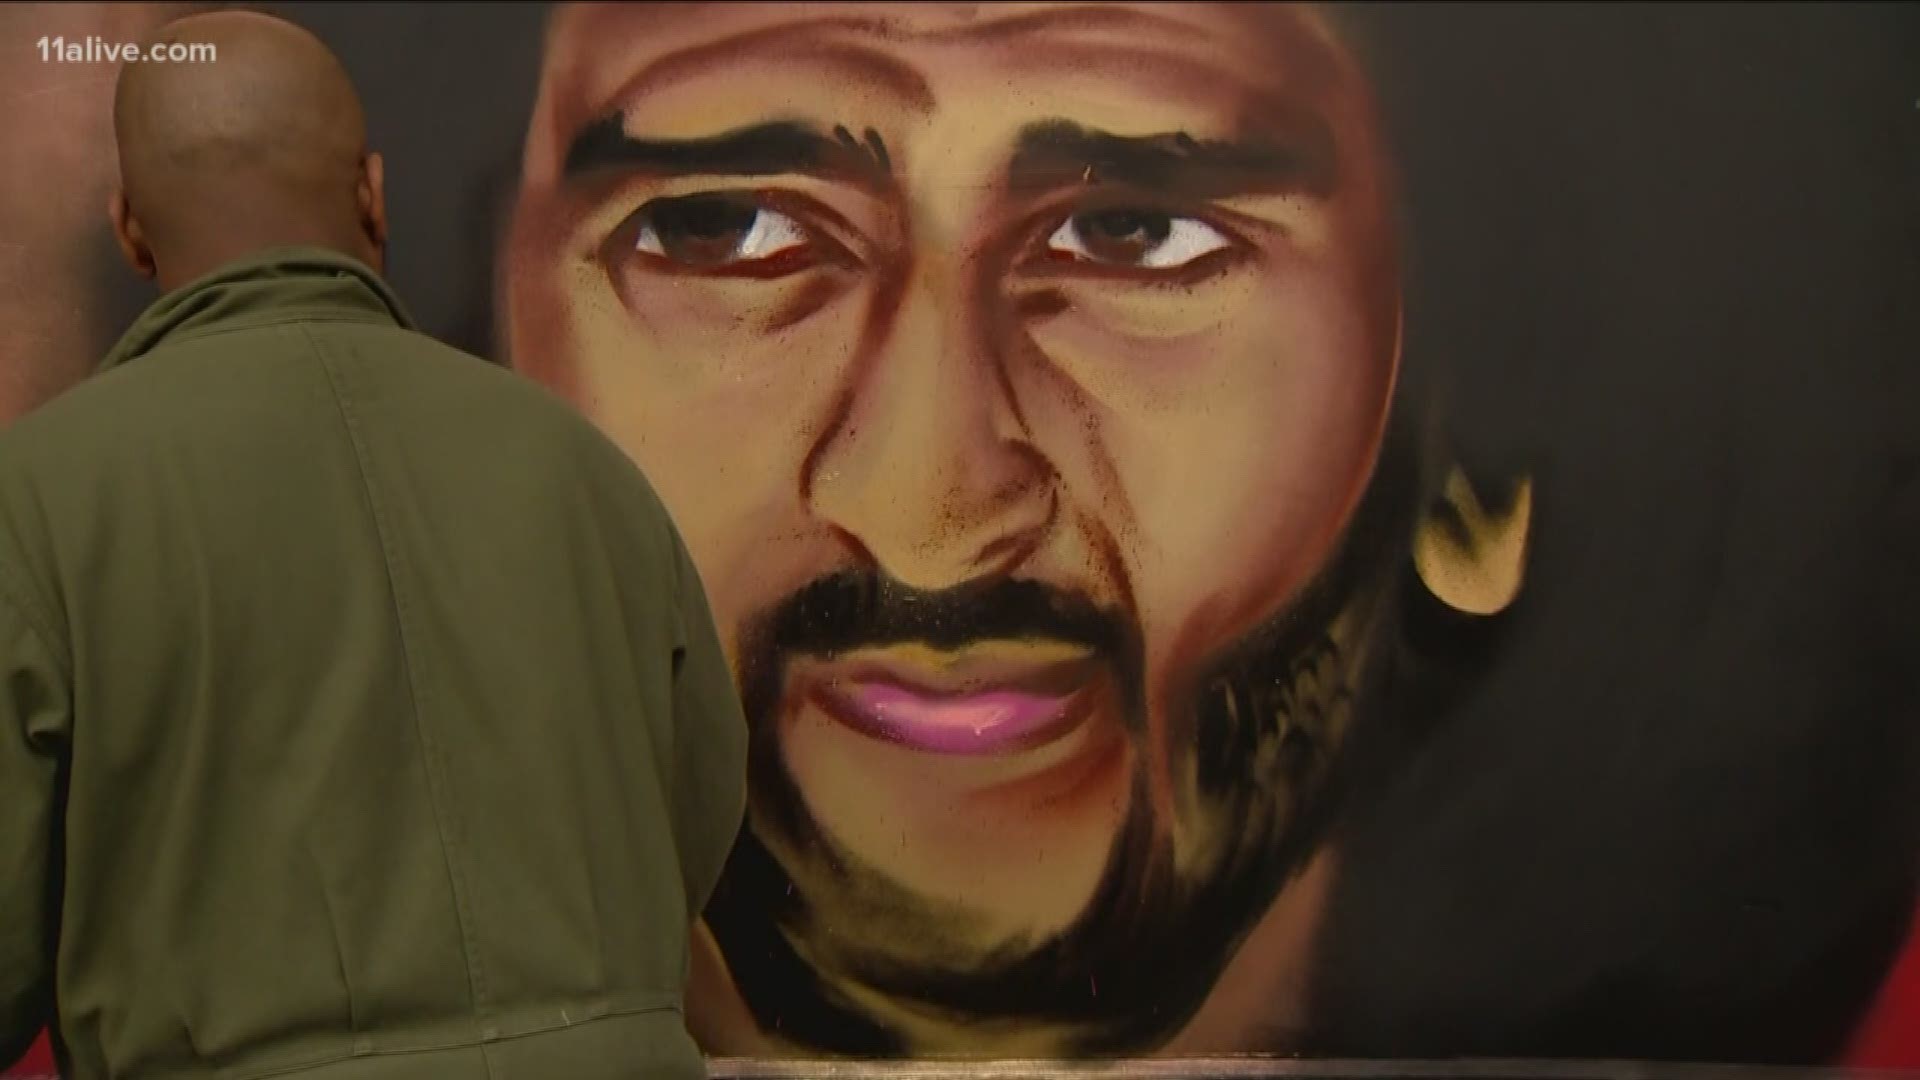 Artist Fabian Williams plans to replace demolished mural of Colin Kaepernick with at least seven others.